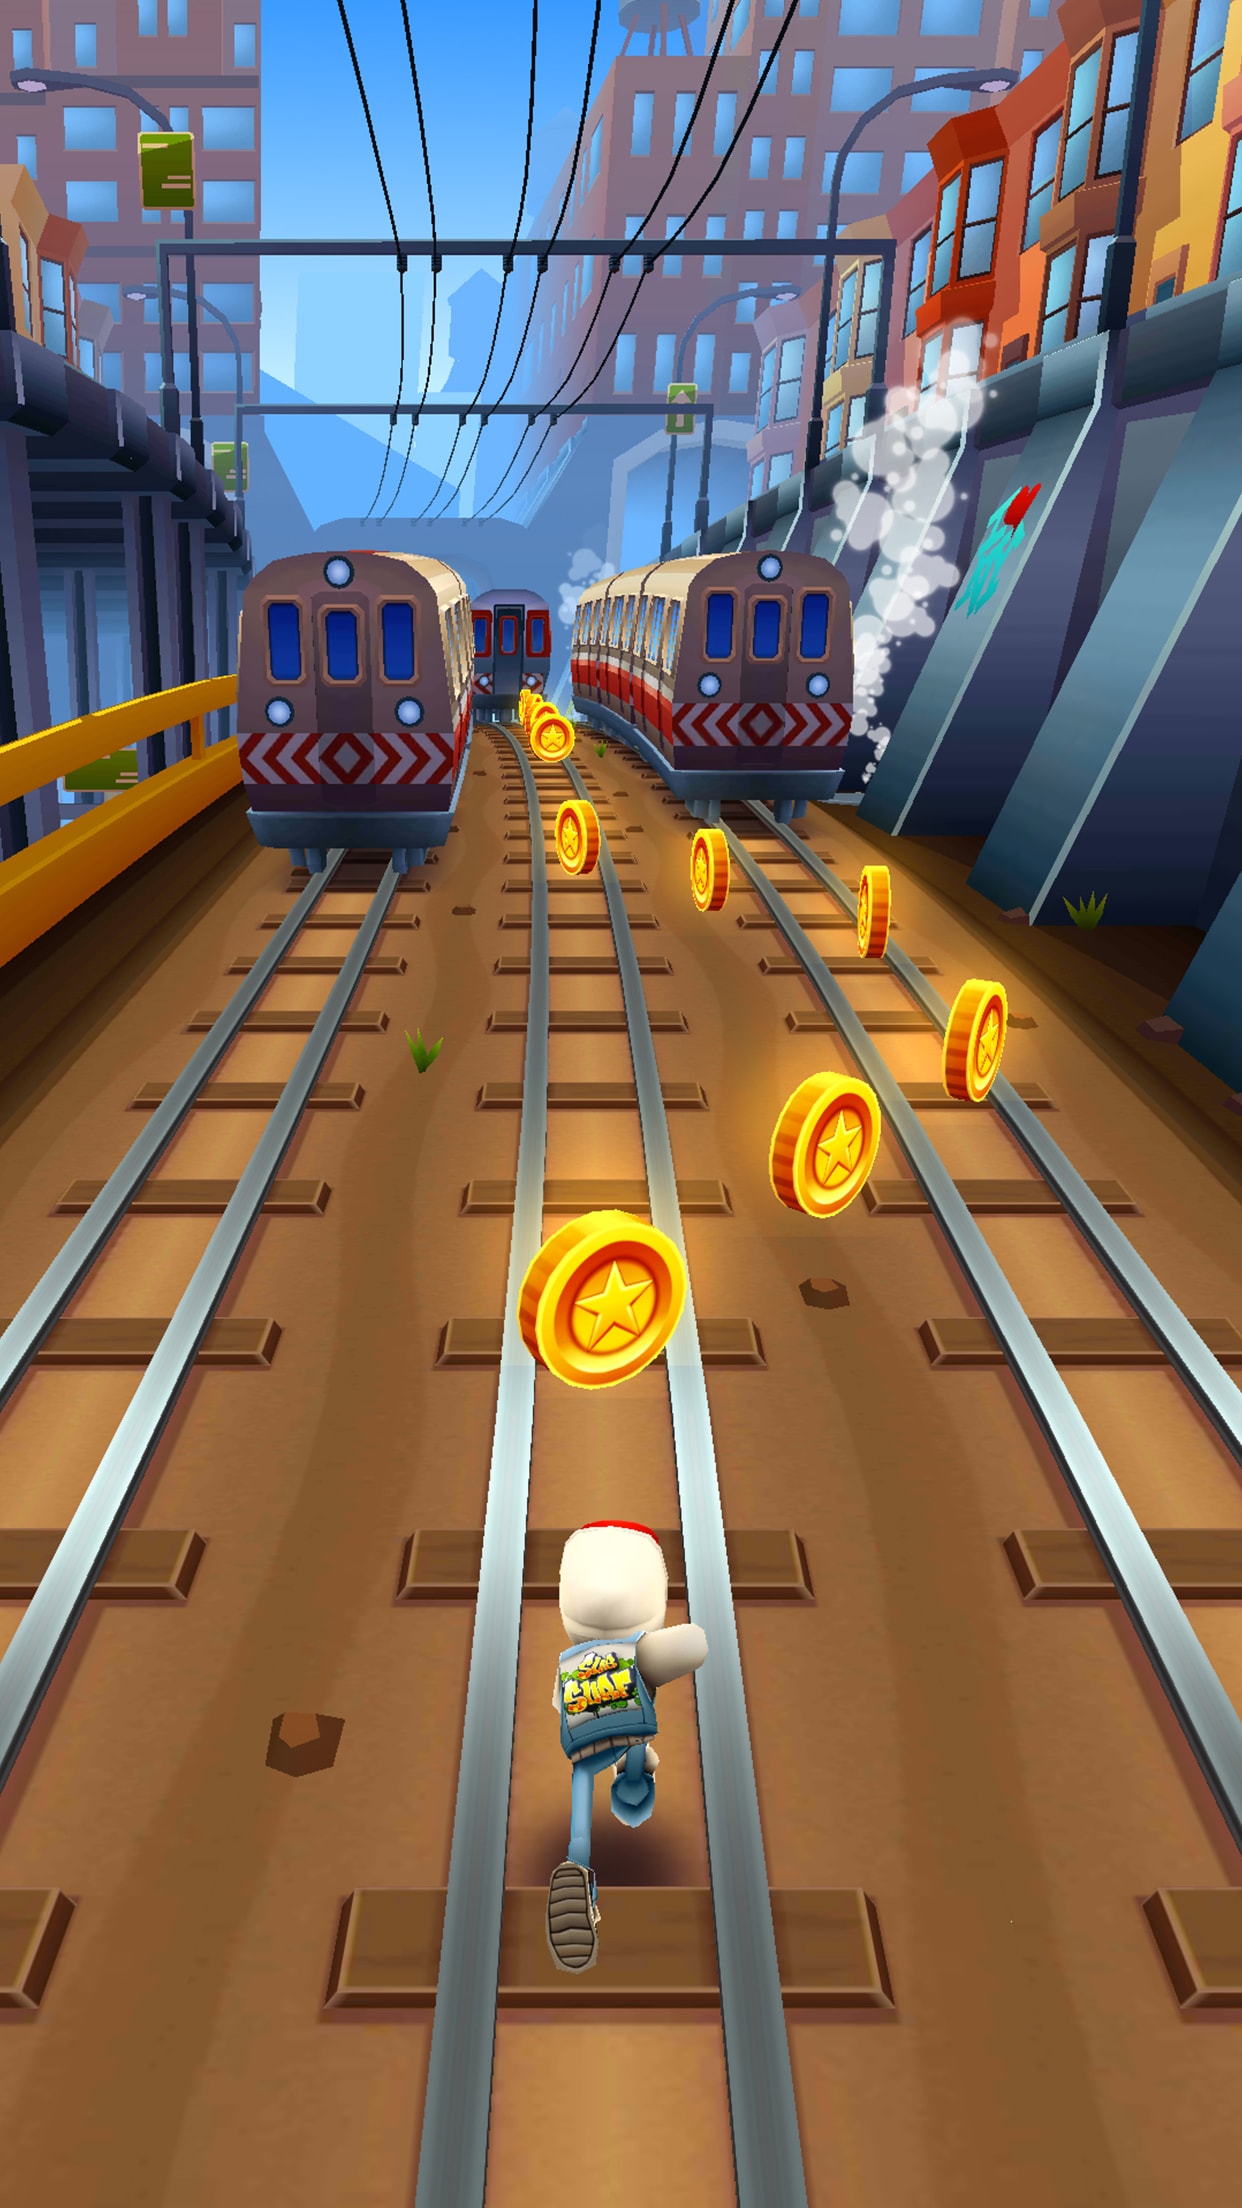 Miniclip To Buy Subway Surfers Mobile Game Developer Sybo